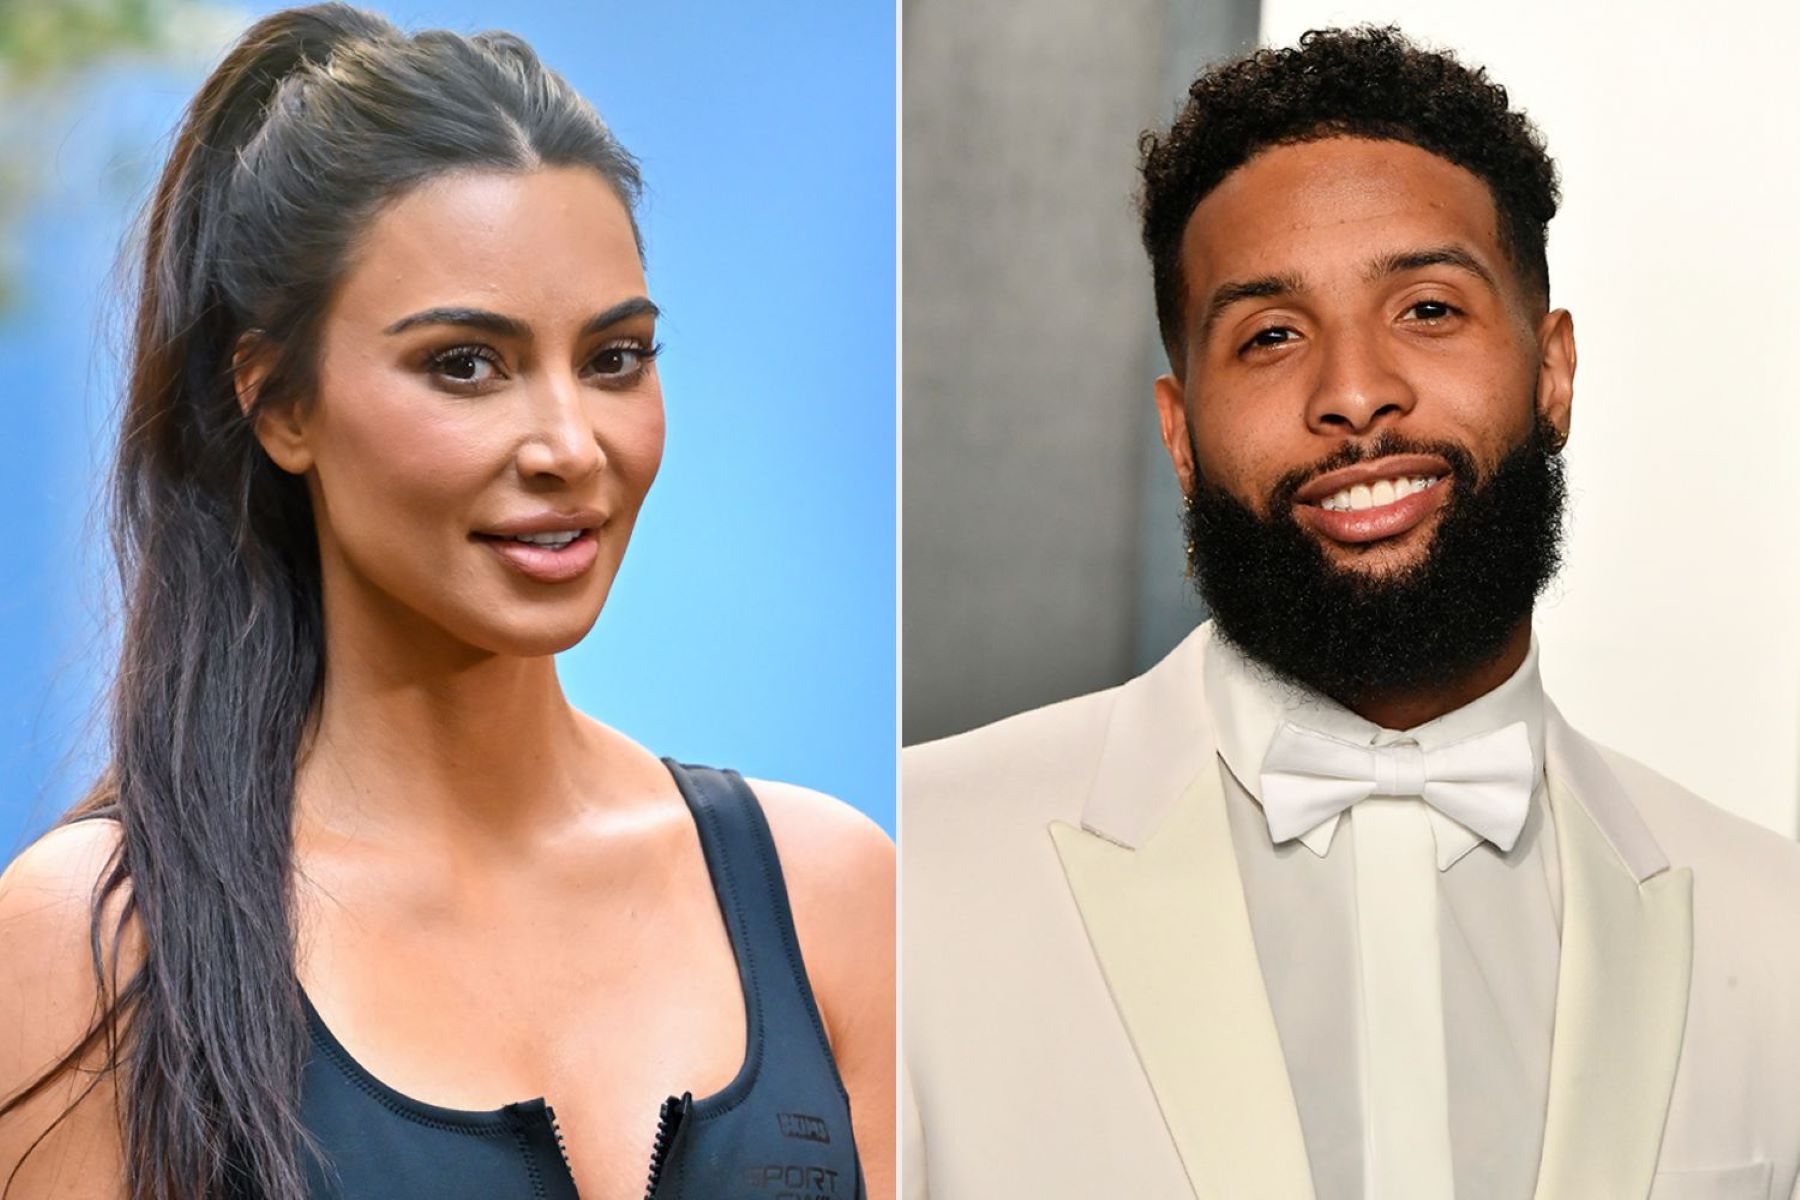 kim-kardashian-attends-odell-beckham-jr-s-birthday-party-and-celebrates-4th-of-july-together